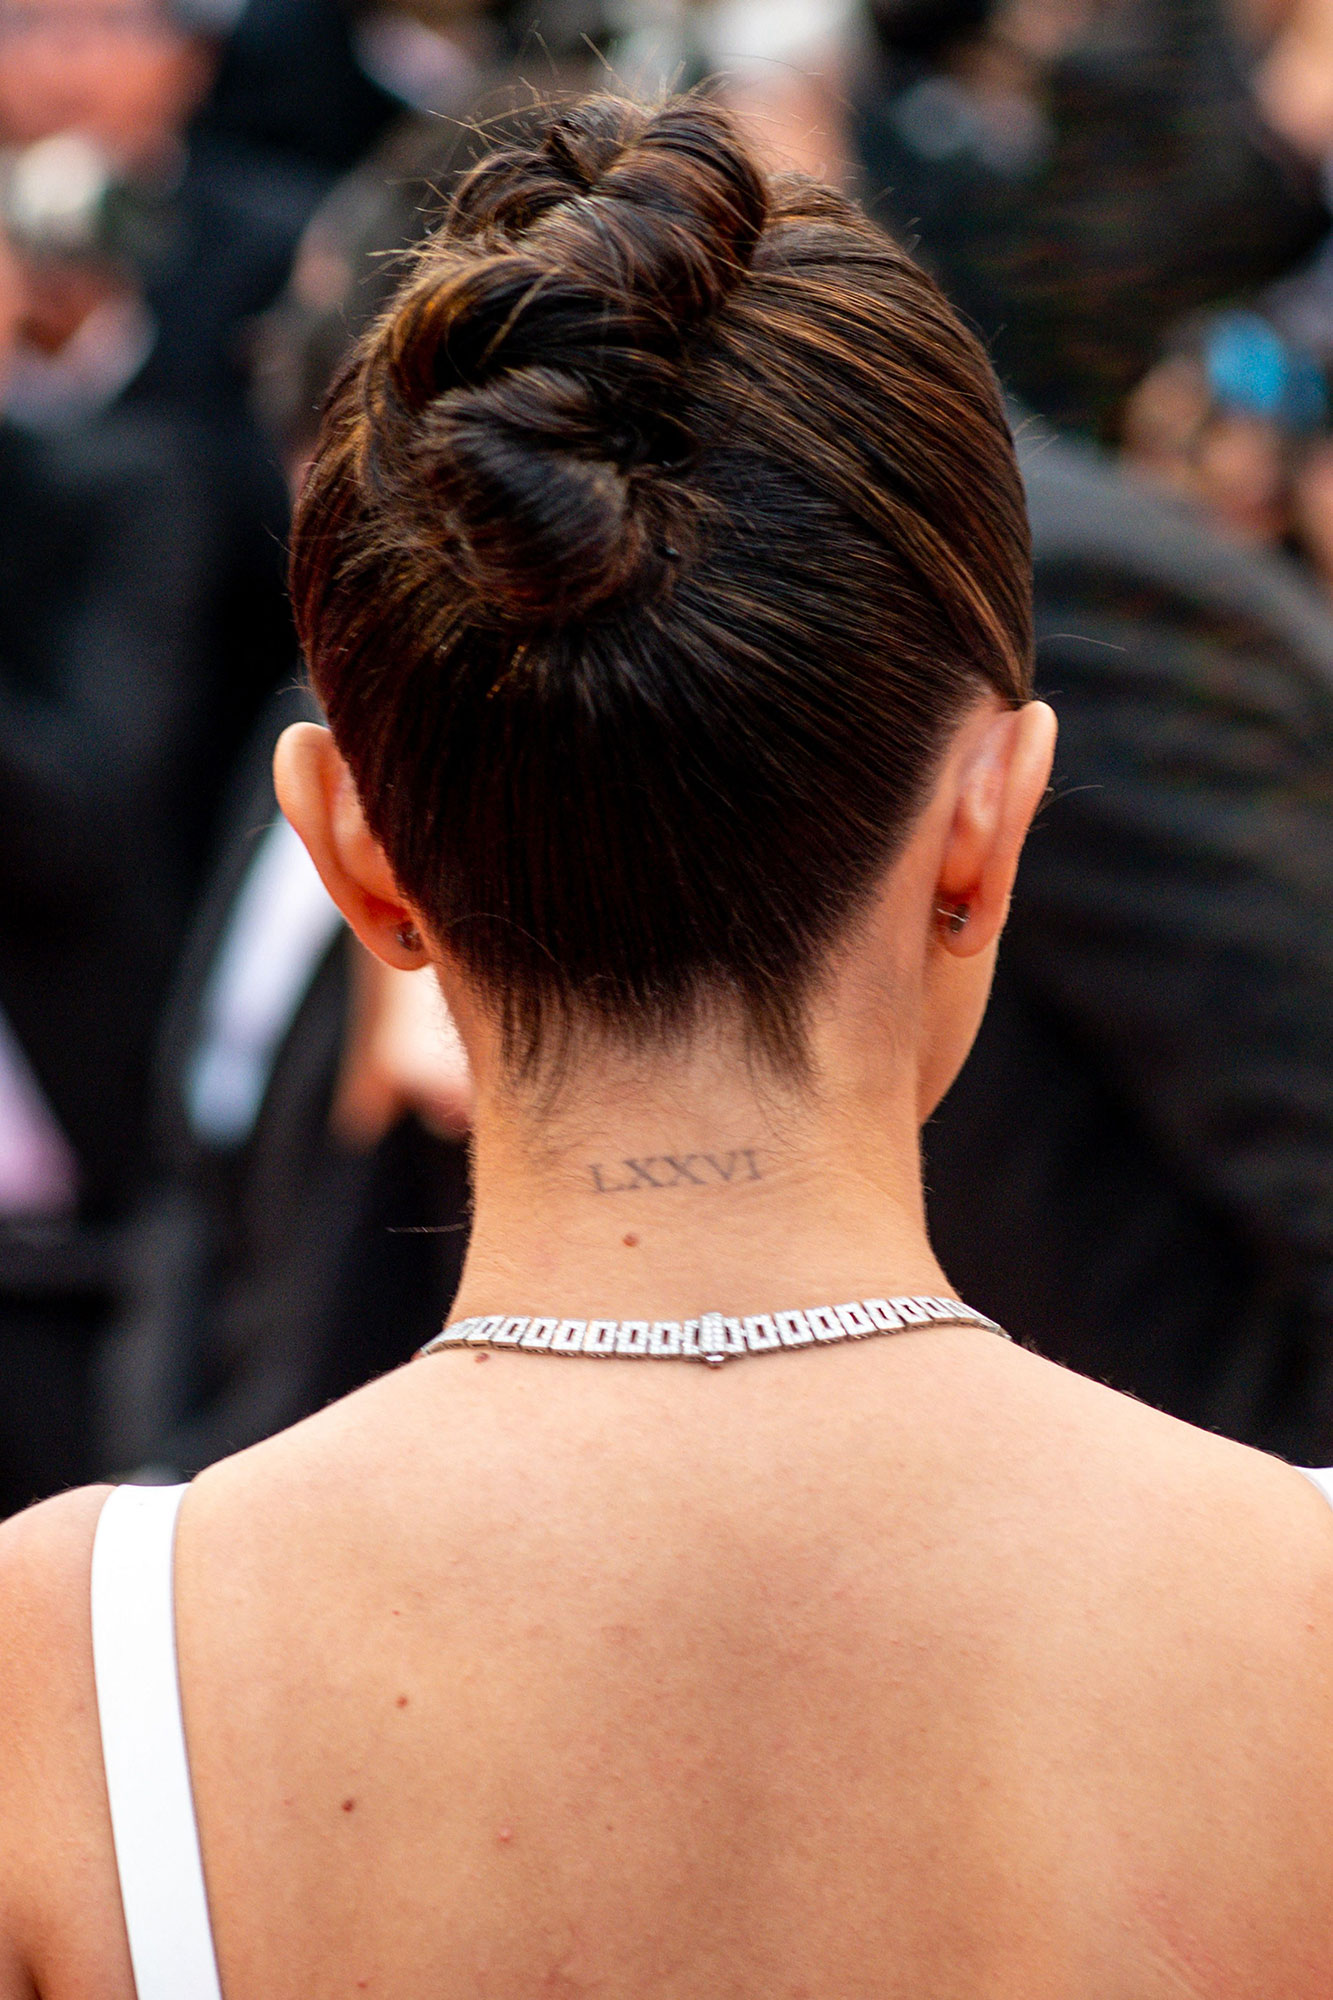 Selena Gomez Inks Her 16th Tattoo On Her Back Leaves Fans Guessing